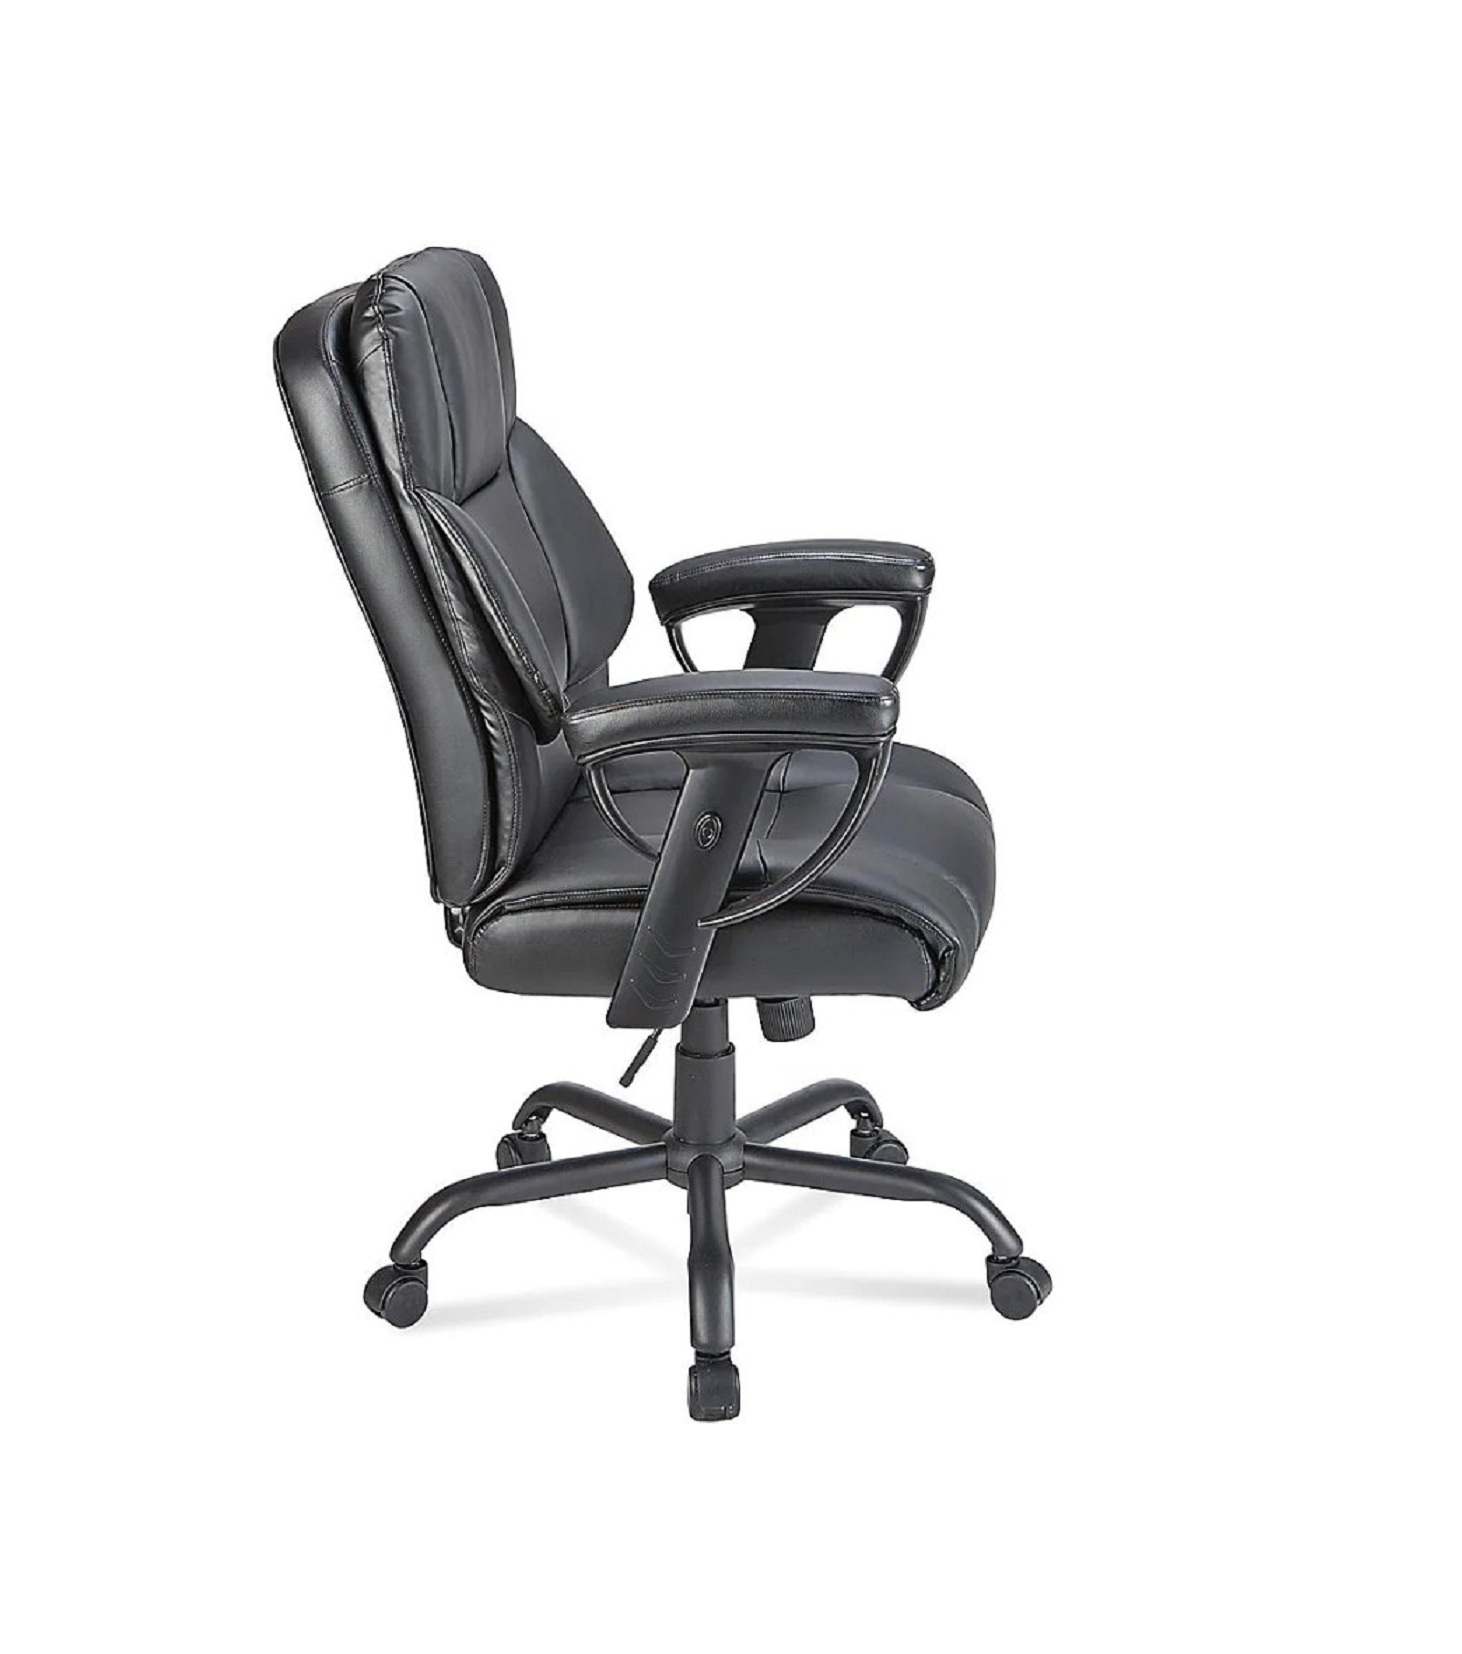 ULINE H-5522 Big And Tall Leather Office Chair Installation Guide